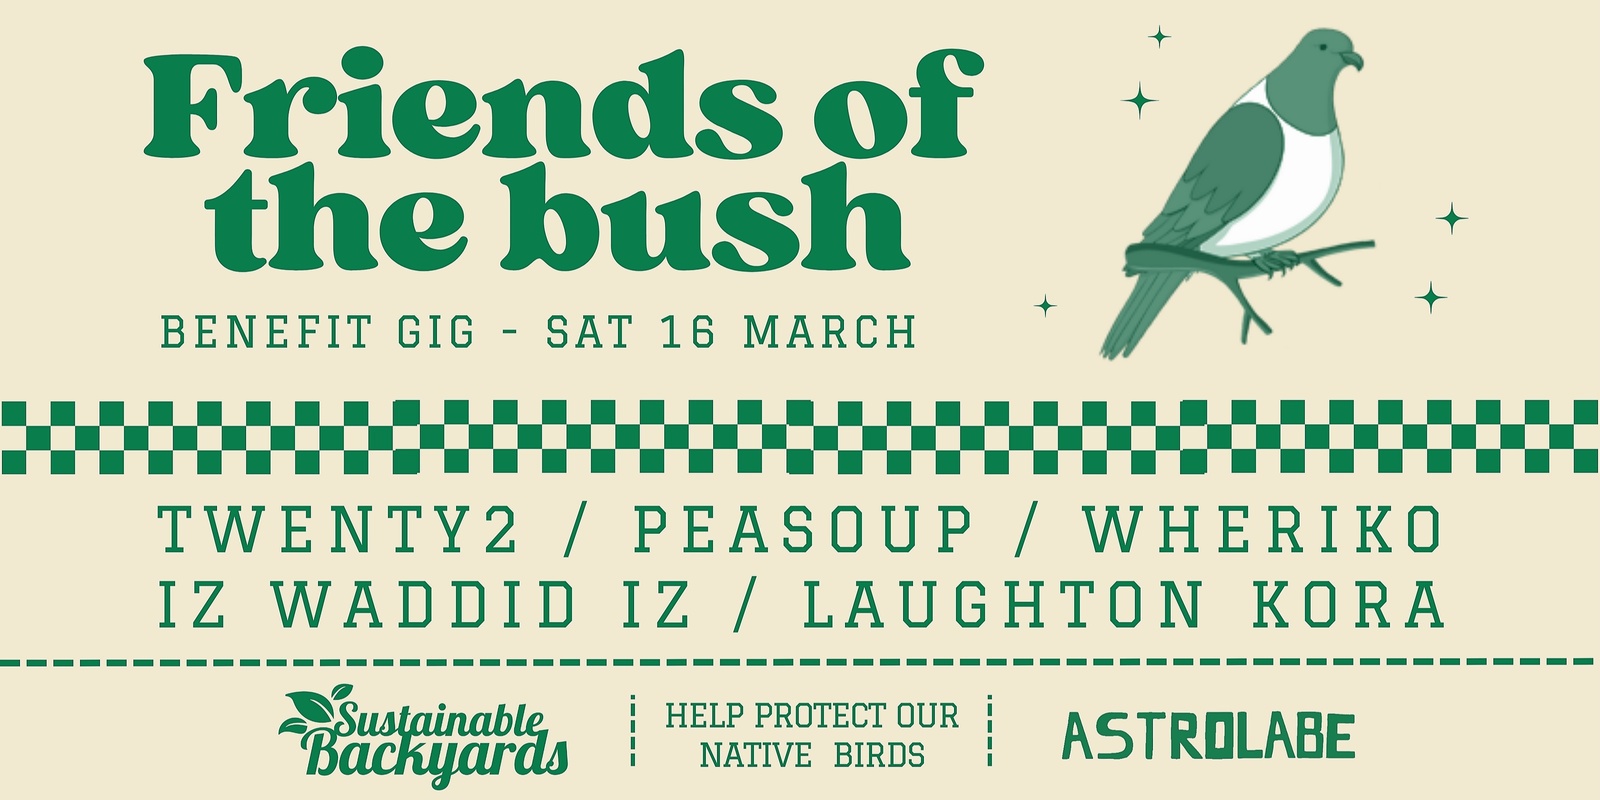 Banner image for Friends Of The Bush Benefit Gig